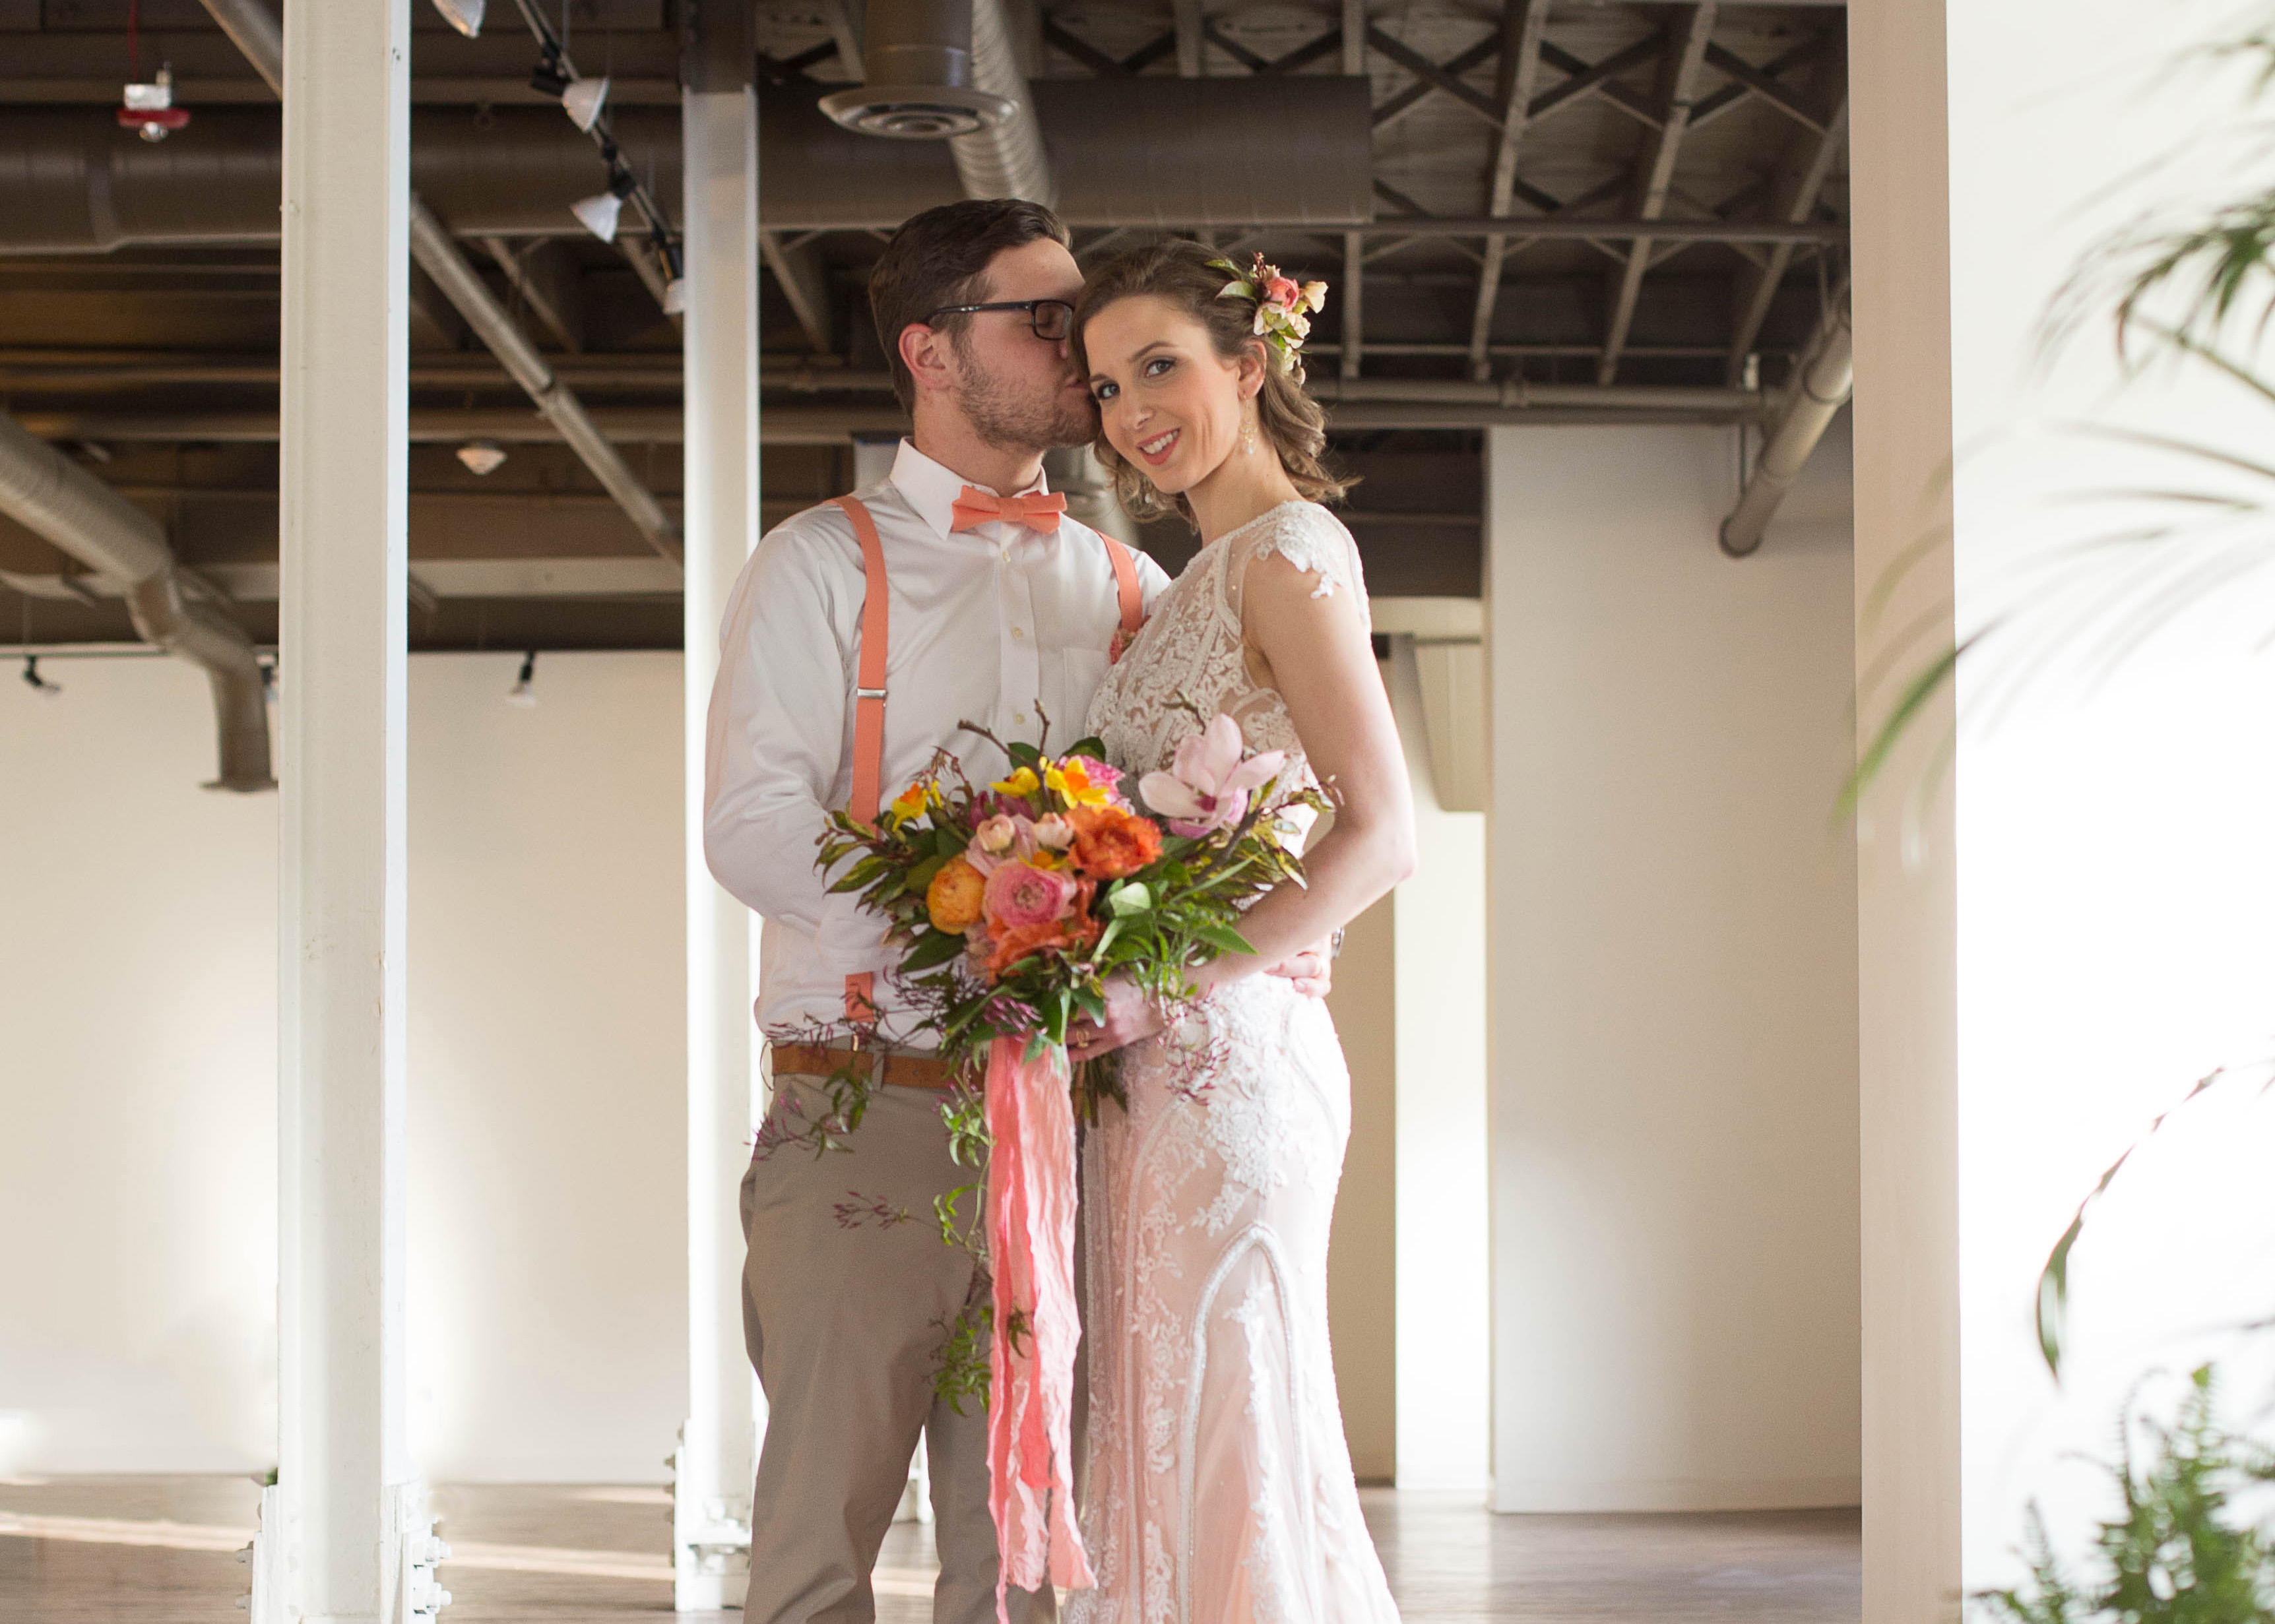 Wedding details and cake, Arbor Loft Styled Wedding Shoot, Rochester Wedding Photographer, Mischief and Laughs Photography